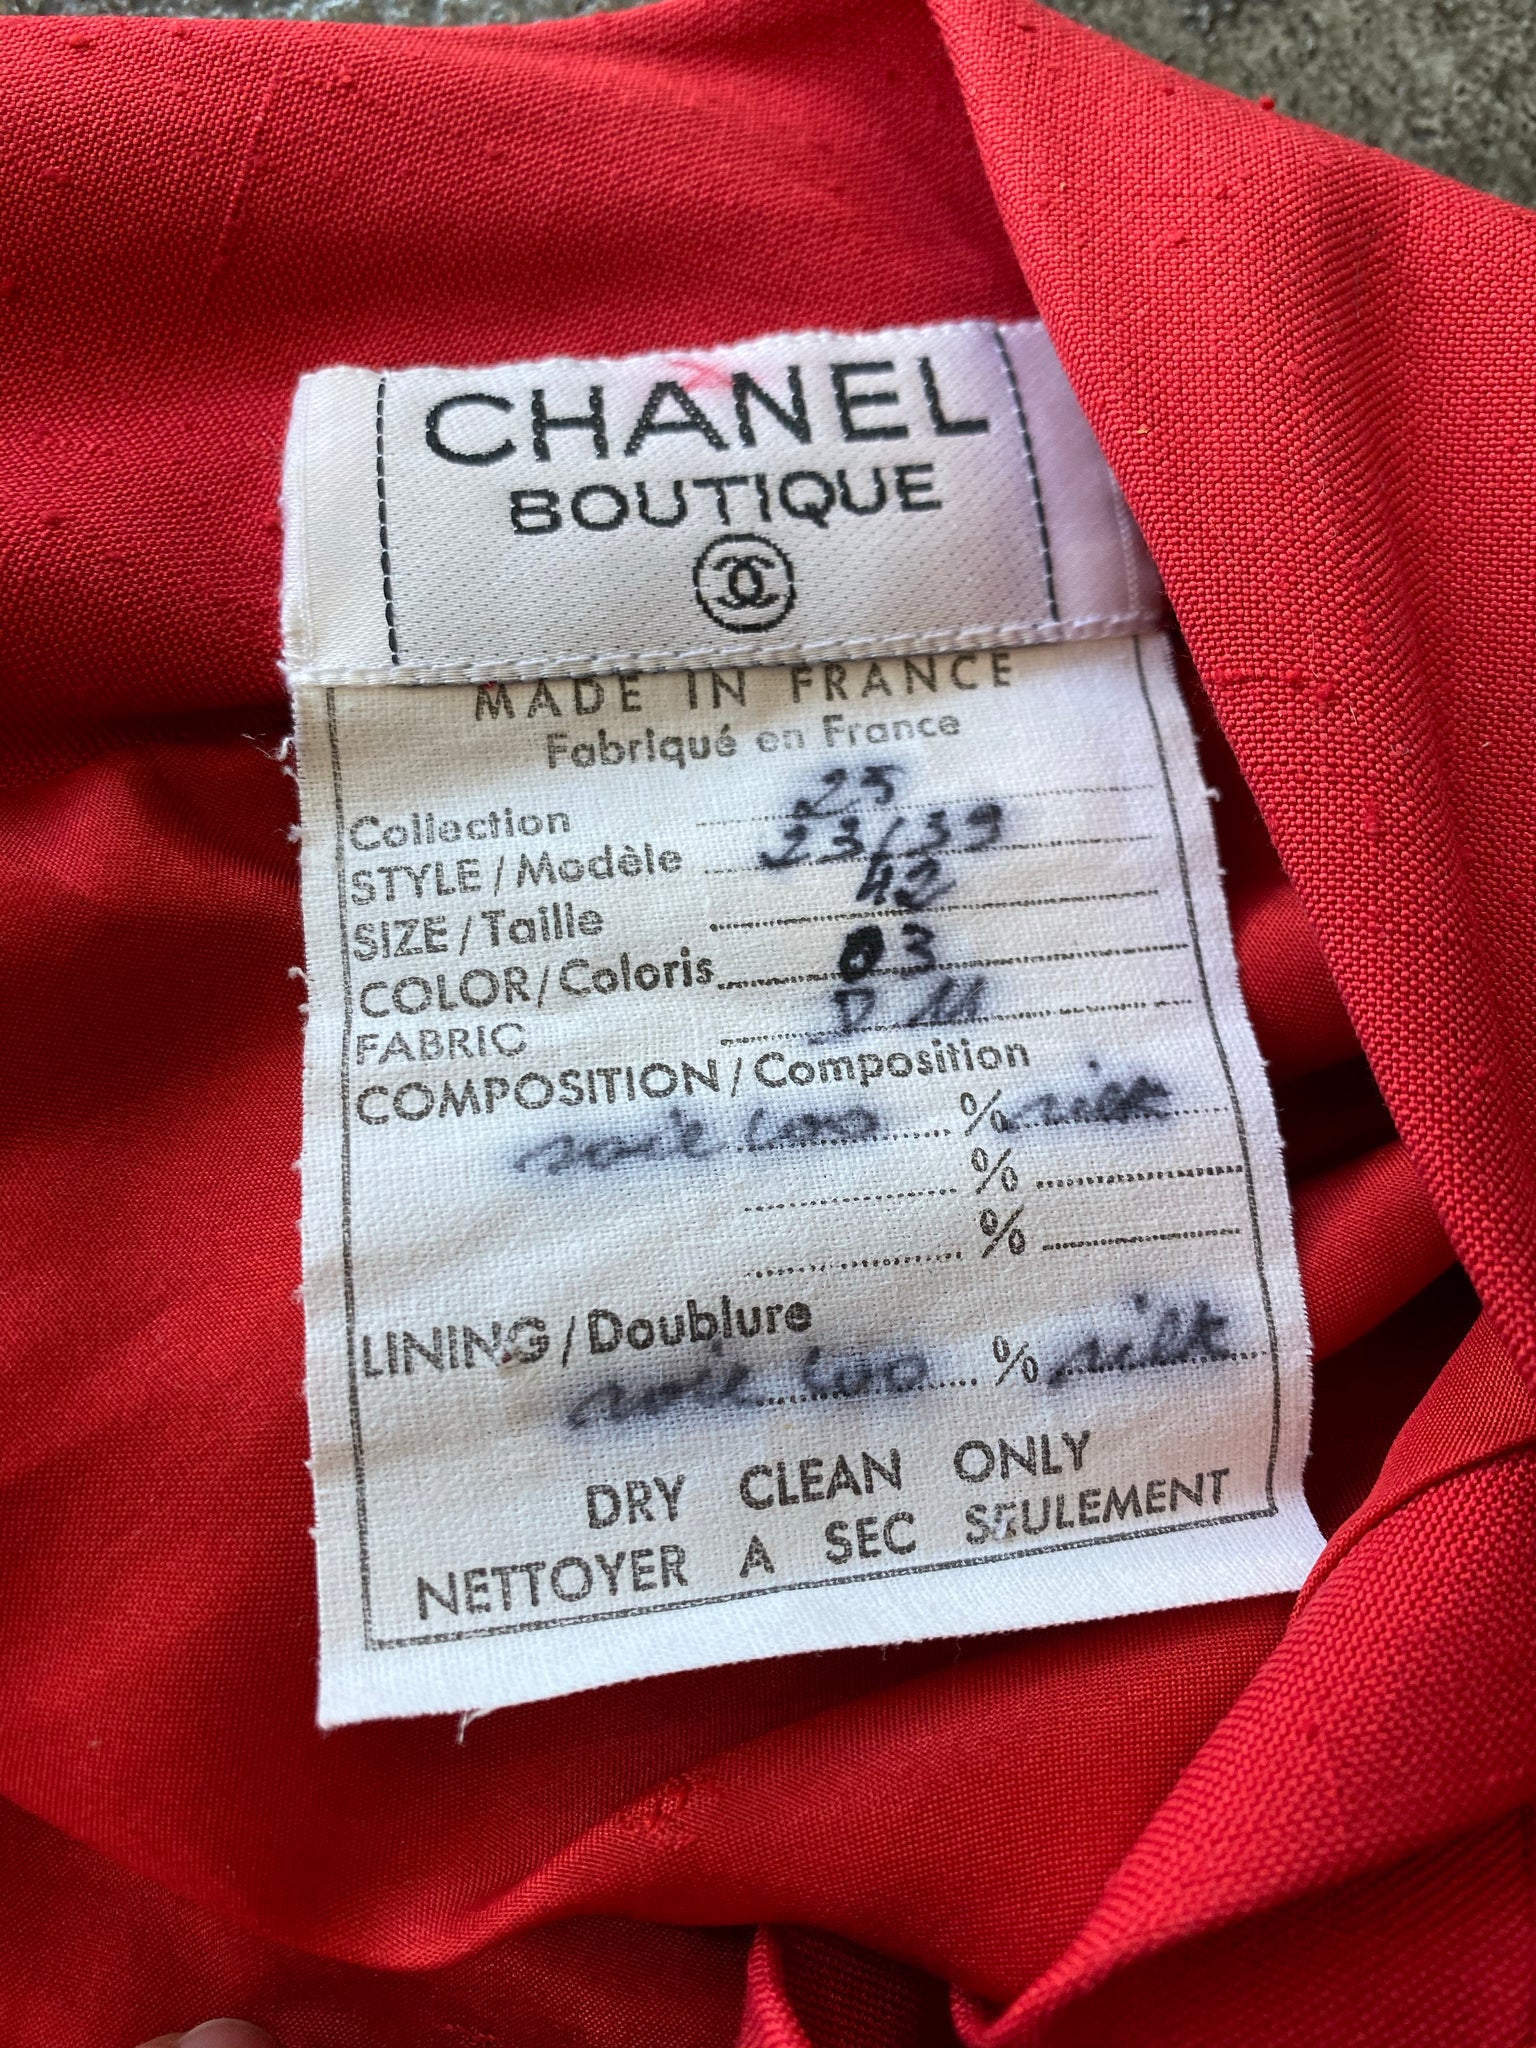 Vintage Chanel Boutique Red Silk Dress – The Curatorial Dept.